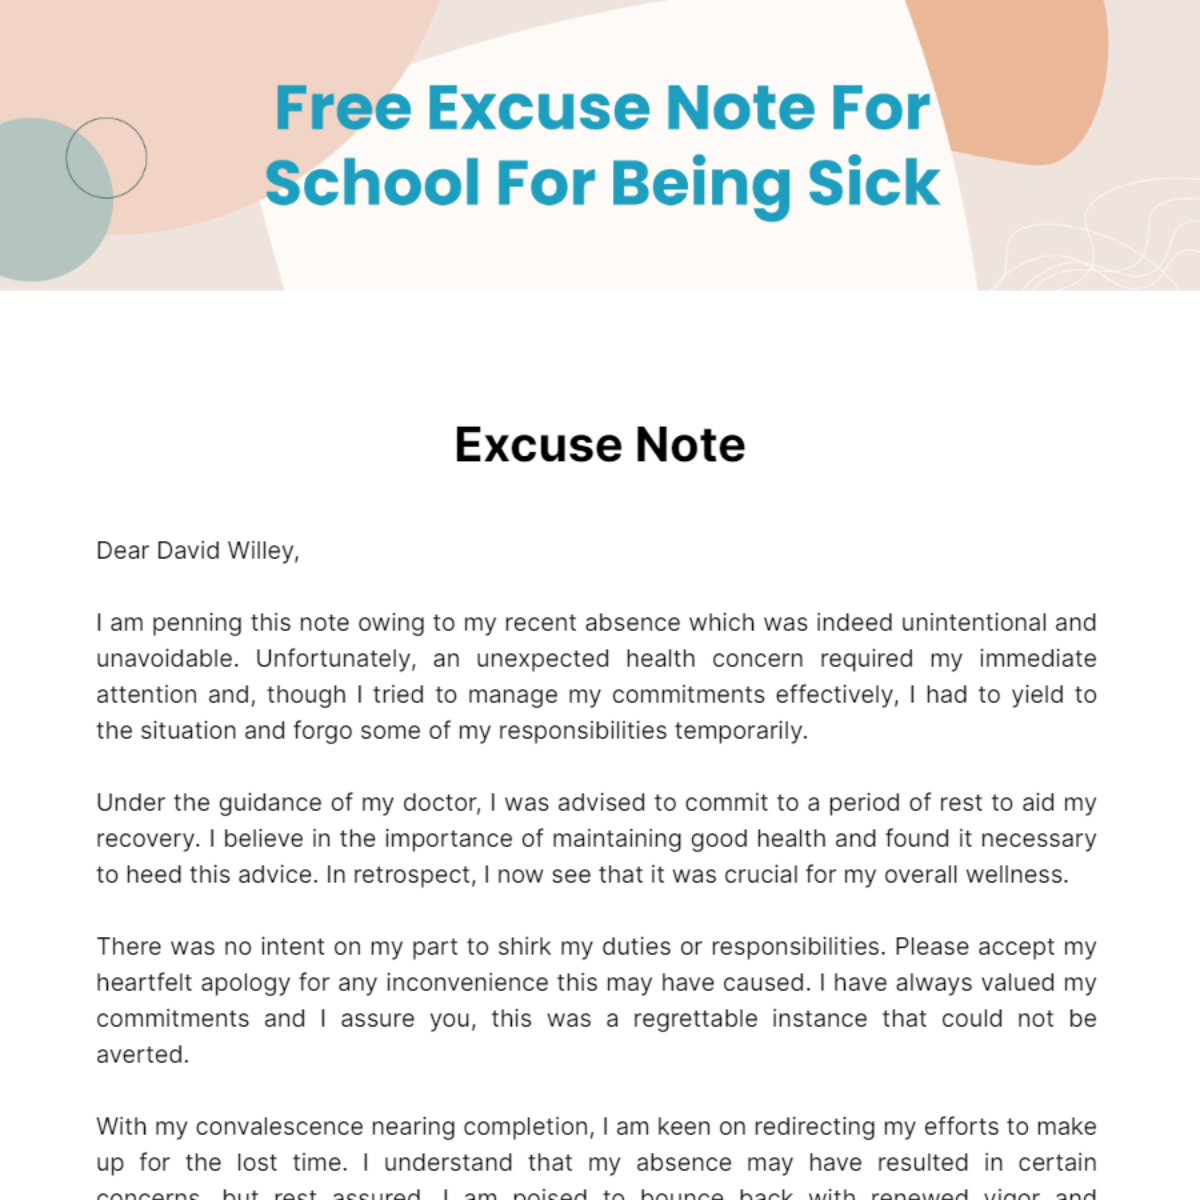 Excuse Note For School For Being Sick Template